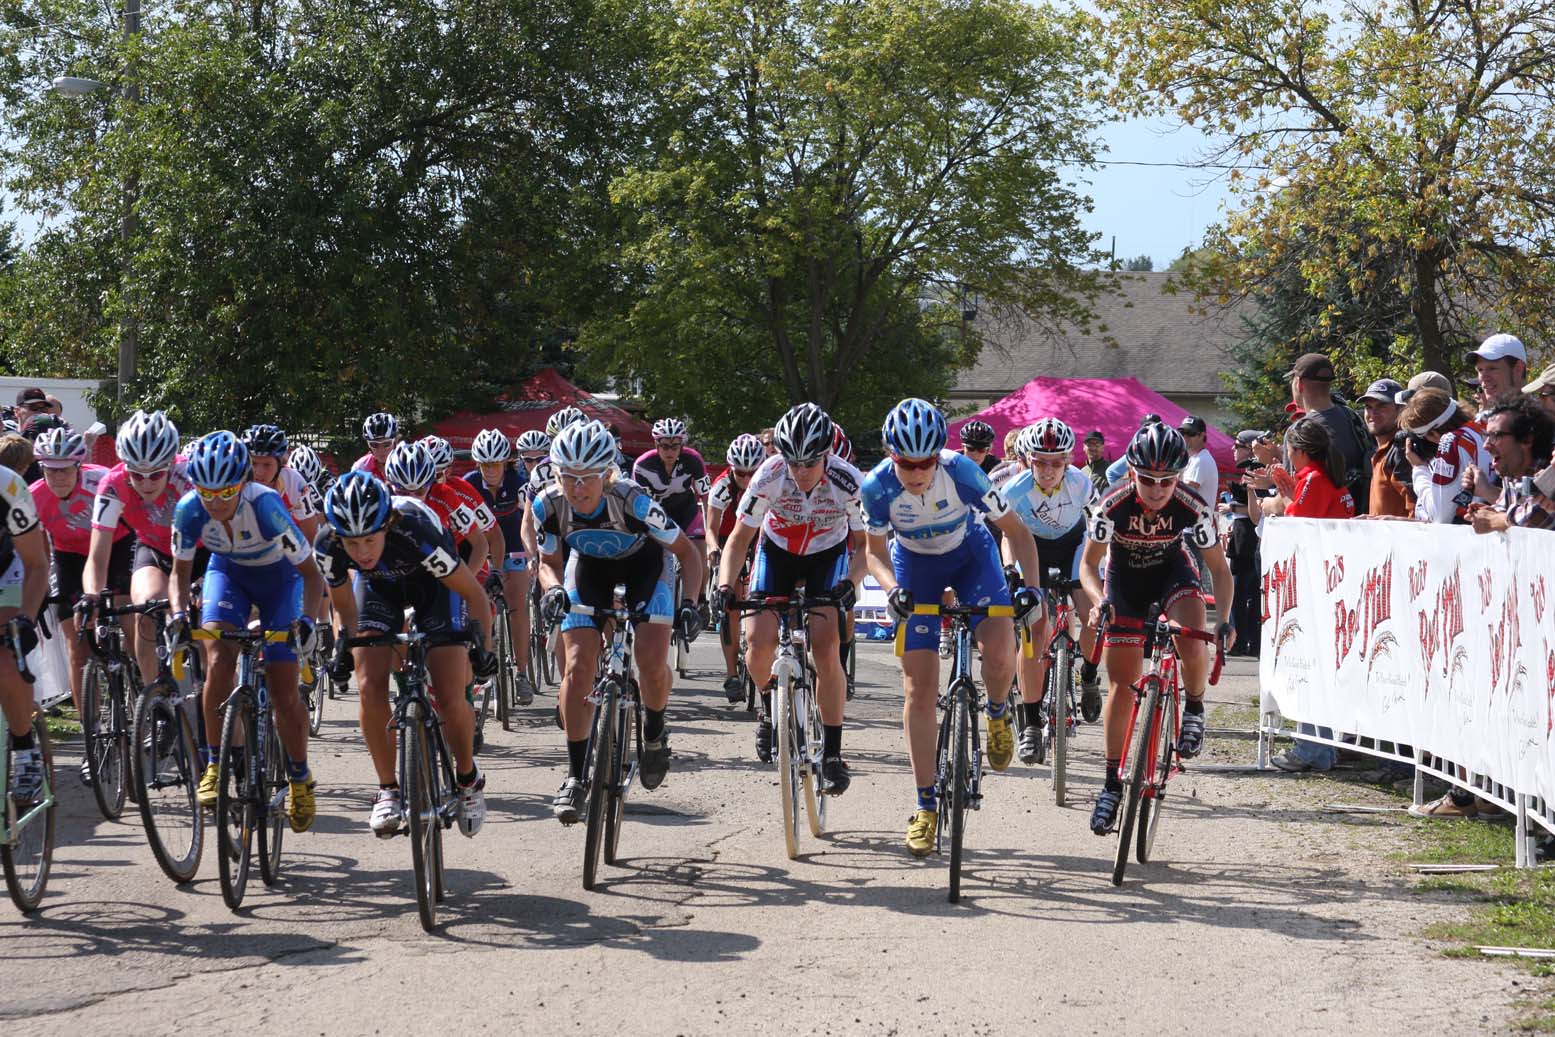 The Women charge for the first turn on day two. by Amy Dykema